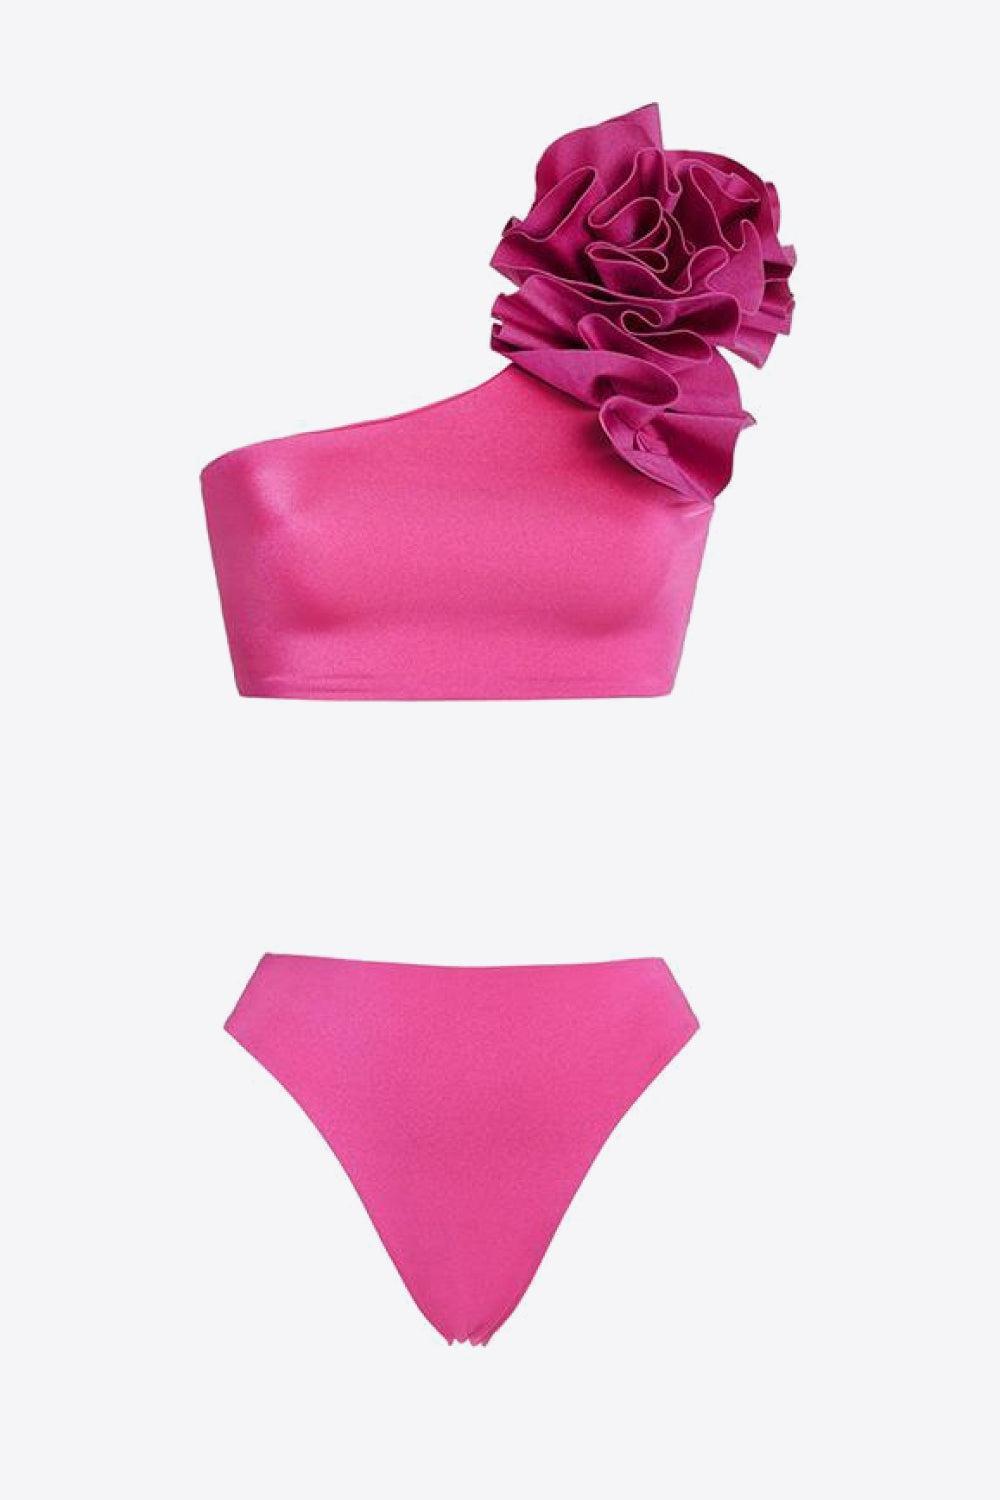 a bikini top and bottom with a flower on it